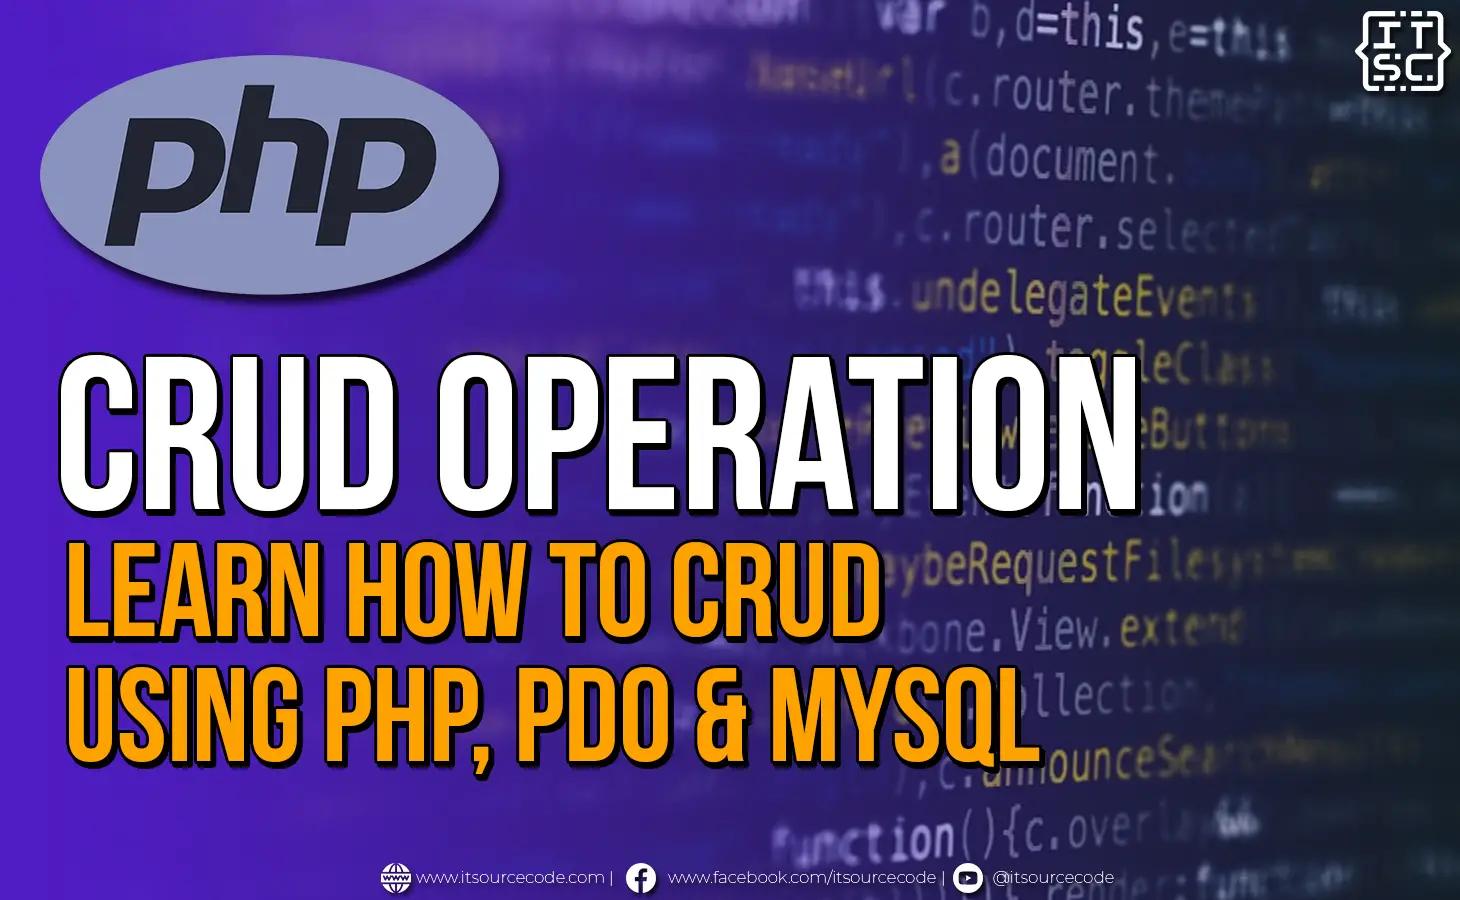 CRUD Operation in PHP, PDO and MySQL